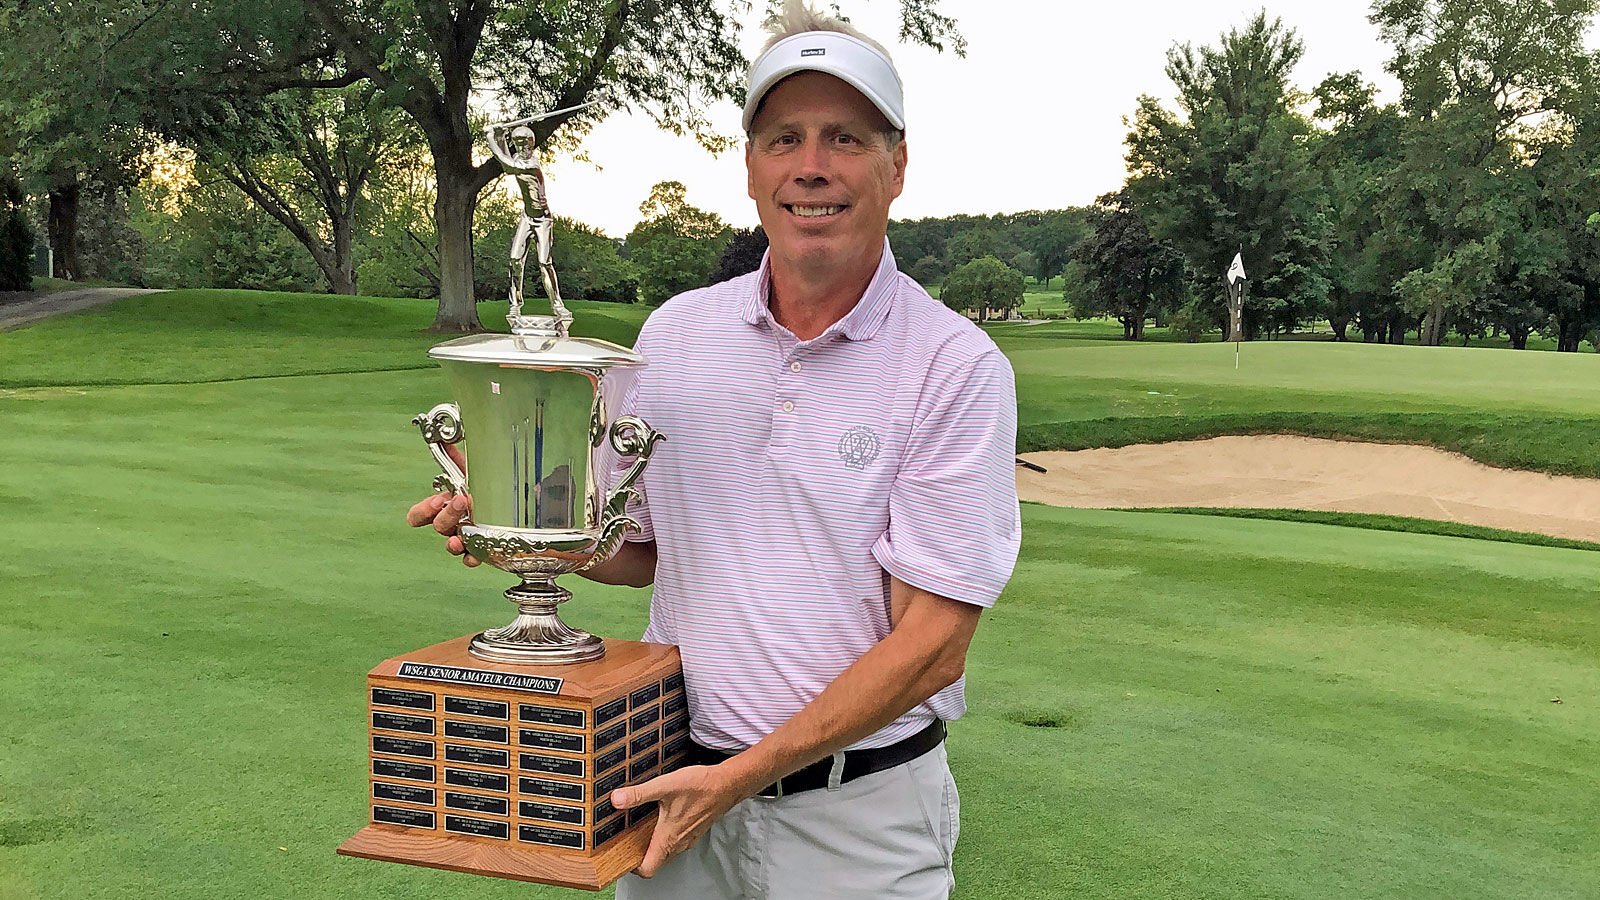 Adam Miller shatters his starter goal for 2021 and earns WSGA Player of the Year; Bob Gregorski wins his first Senior POY award WSGA State Amateur wisconsin.golf